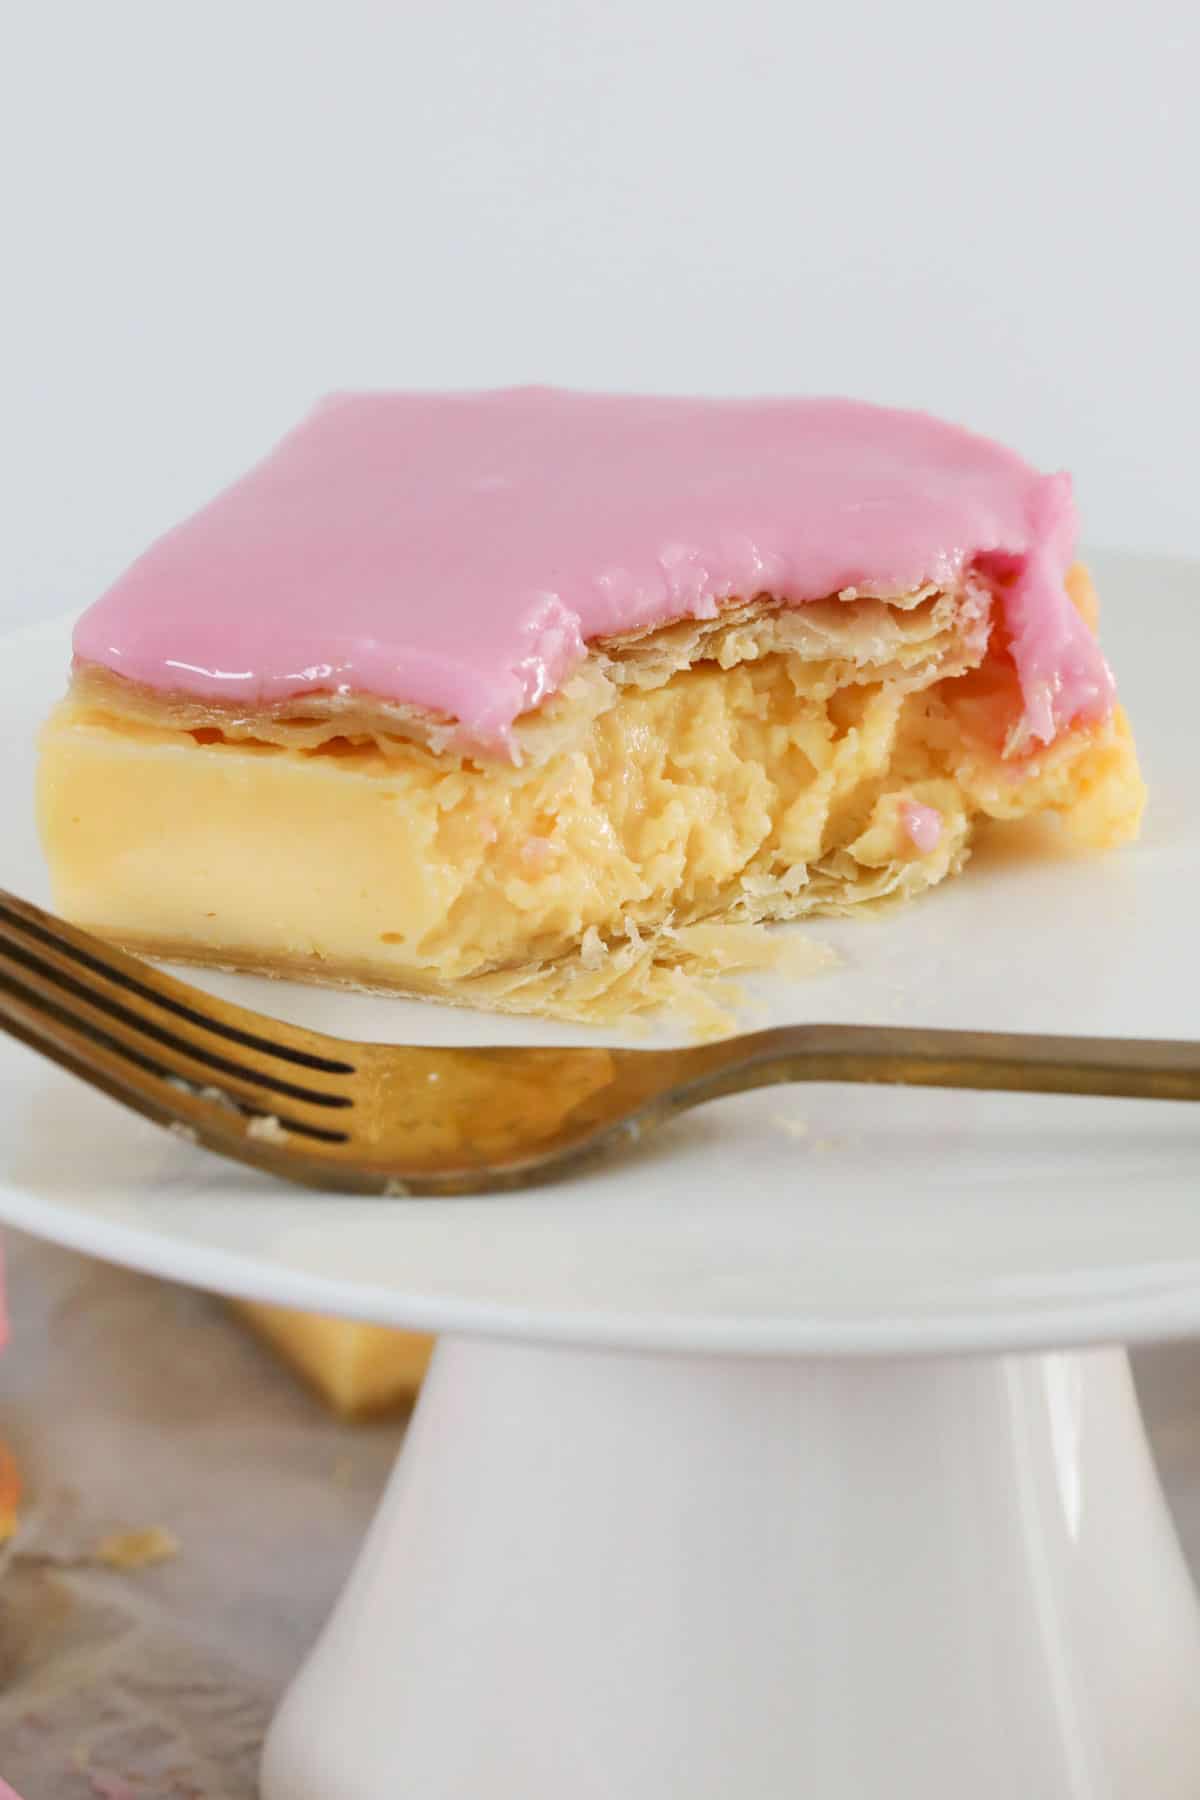 A close up of a piece of vanilla custard slice served, with a forkful removed and the fork resting beside.